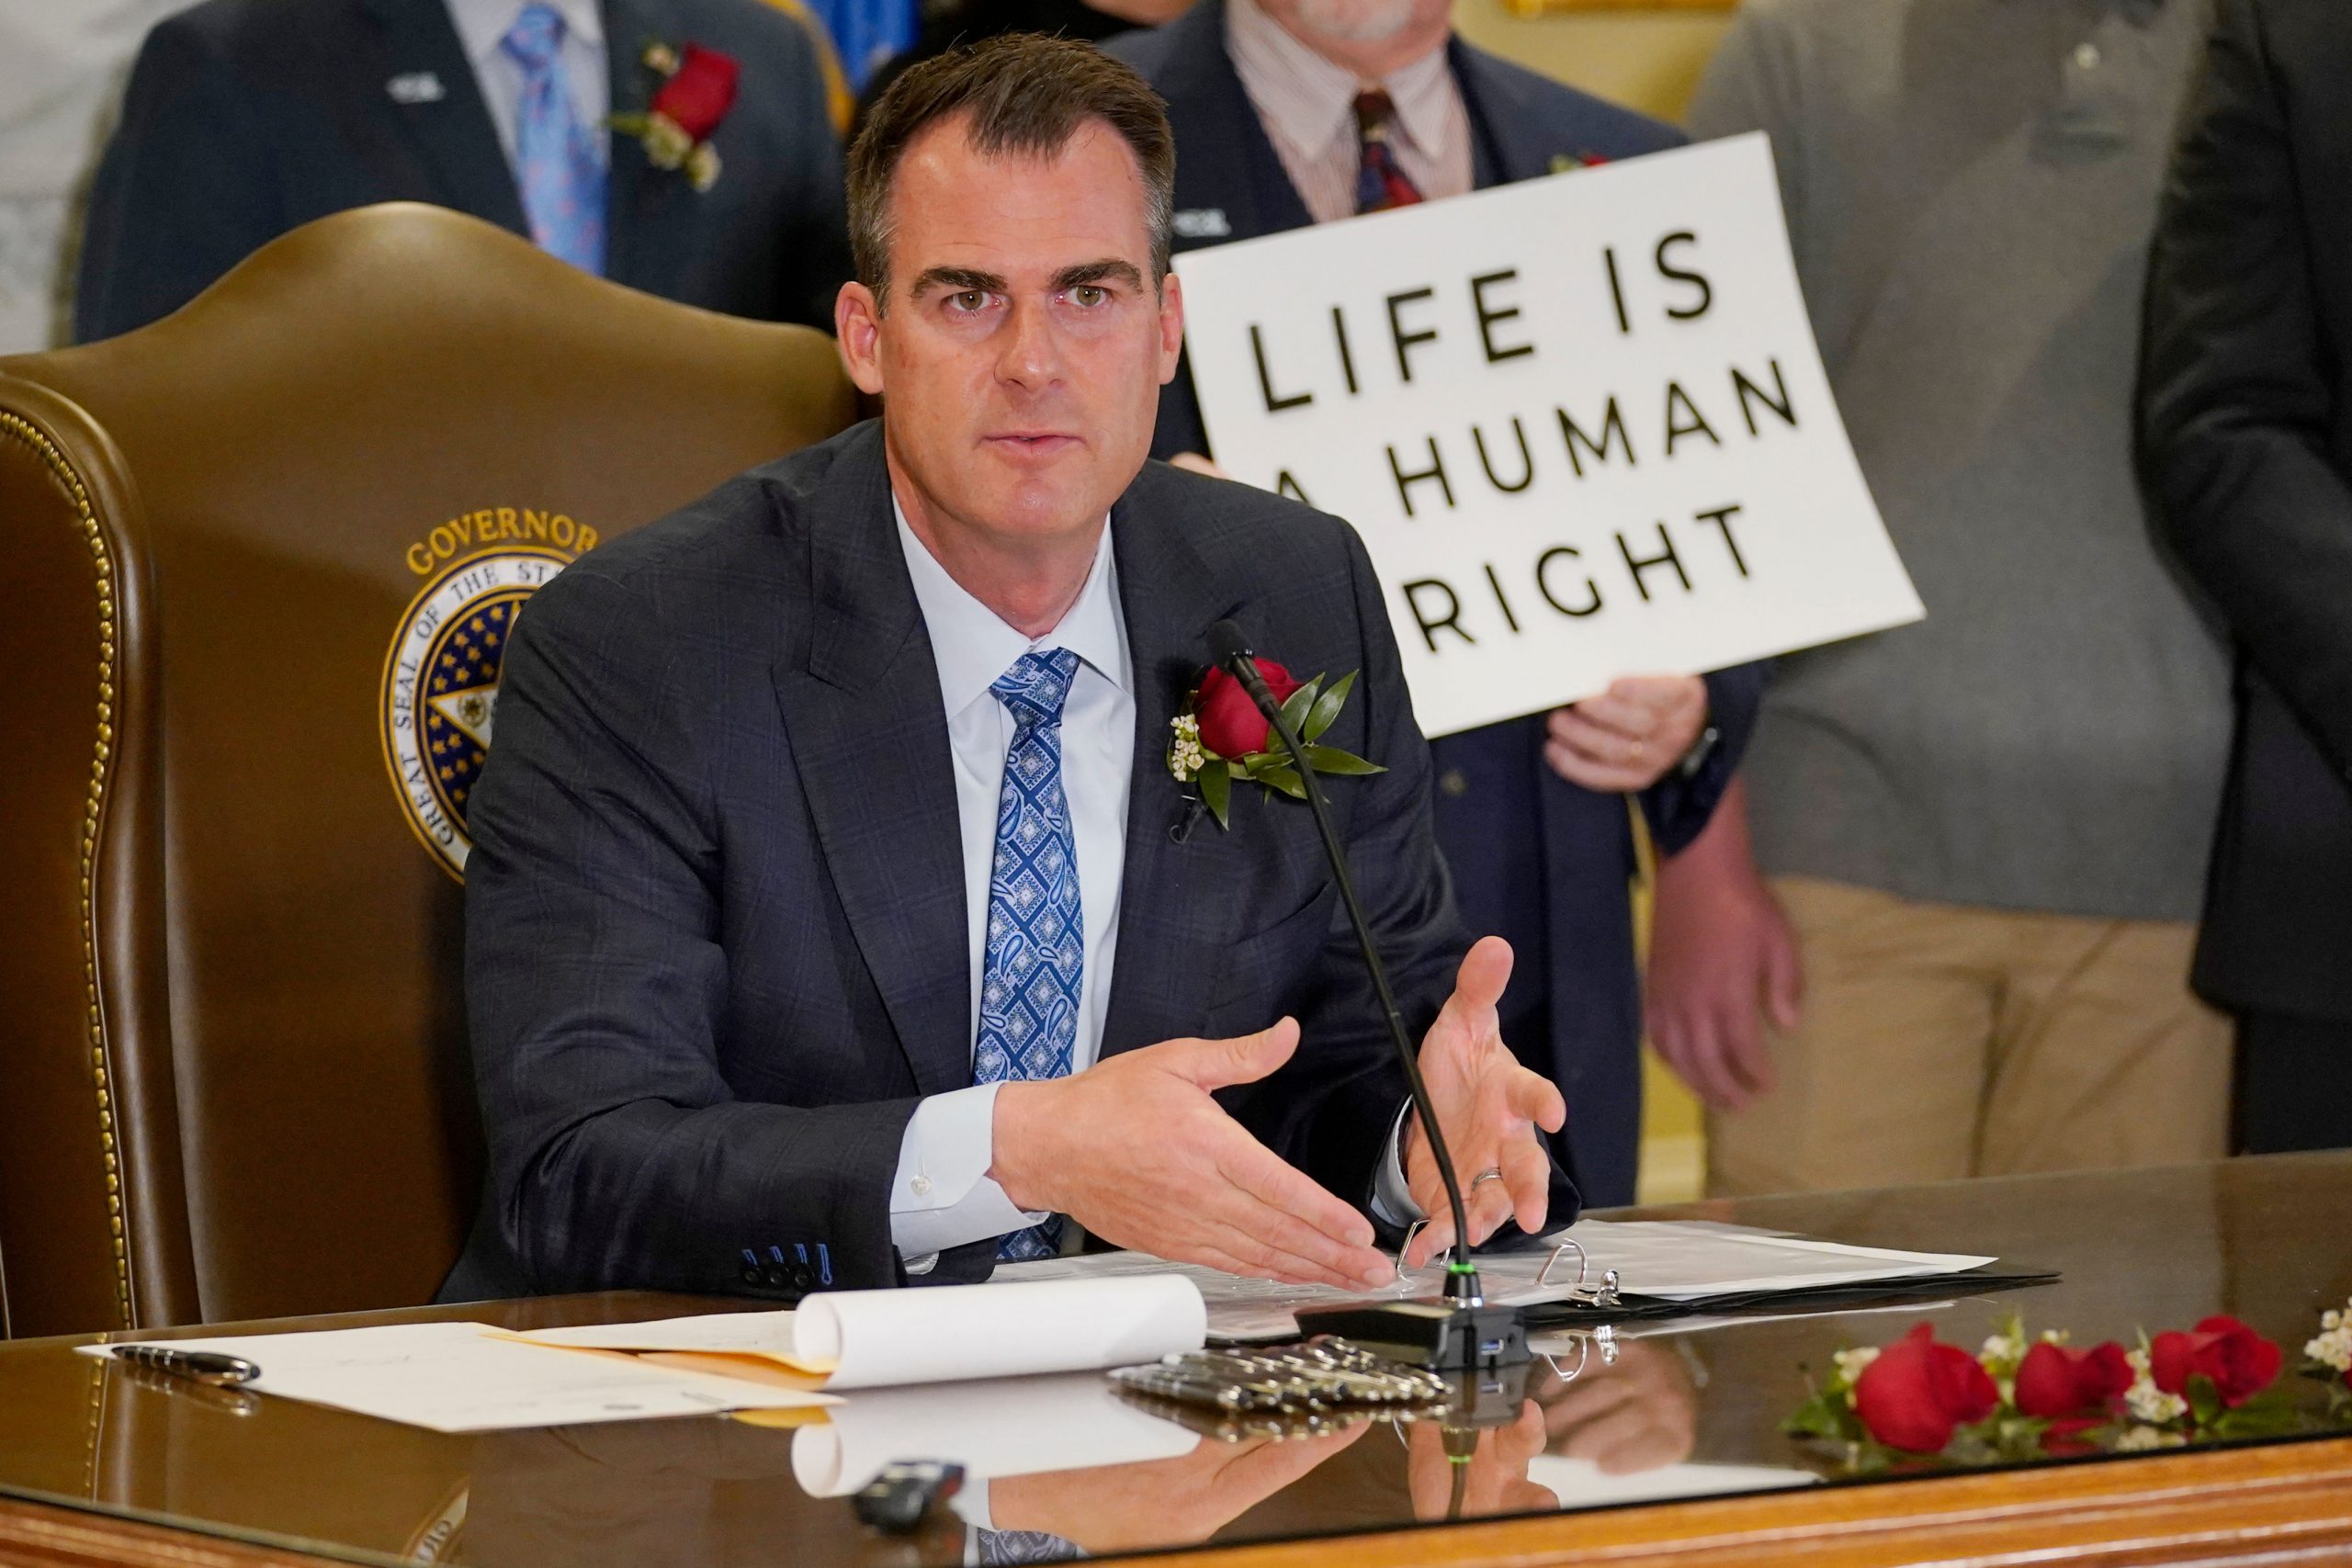 Oklahoma governor Kevin Stitt signs bill to make abortion illegal